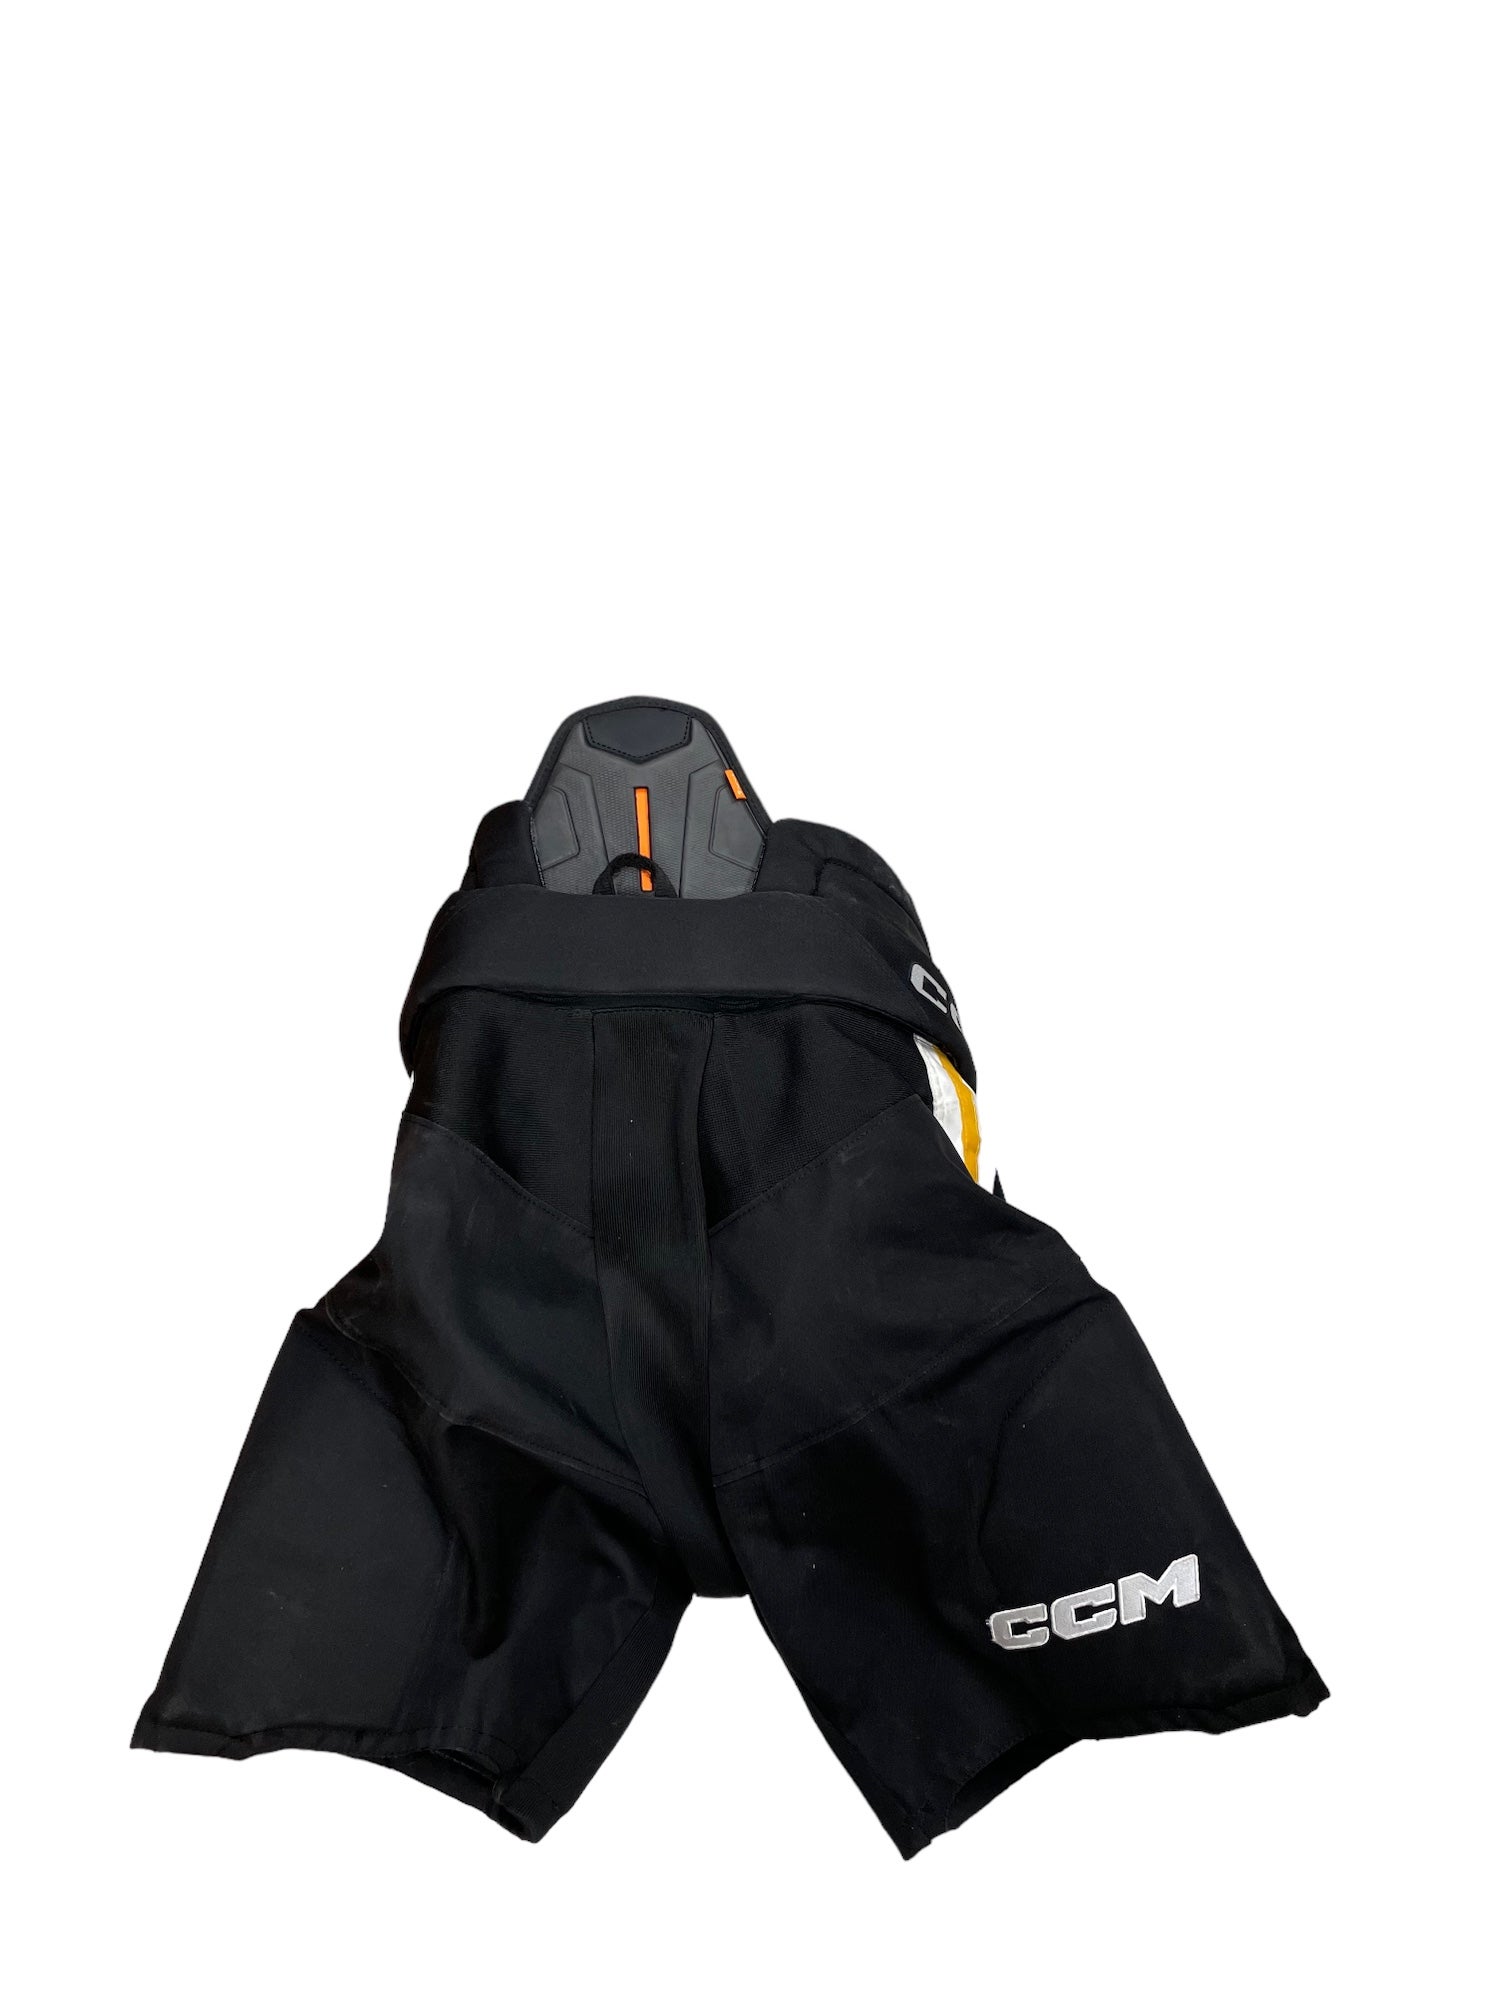 Under Armour Hockey Warm Up Pants - Youth – Sarnia Sting Shop